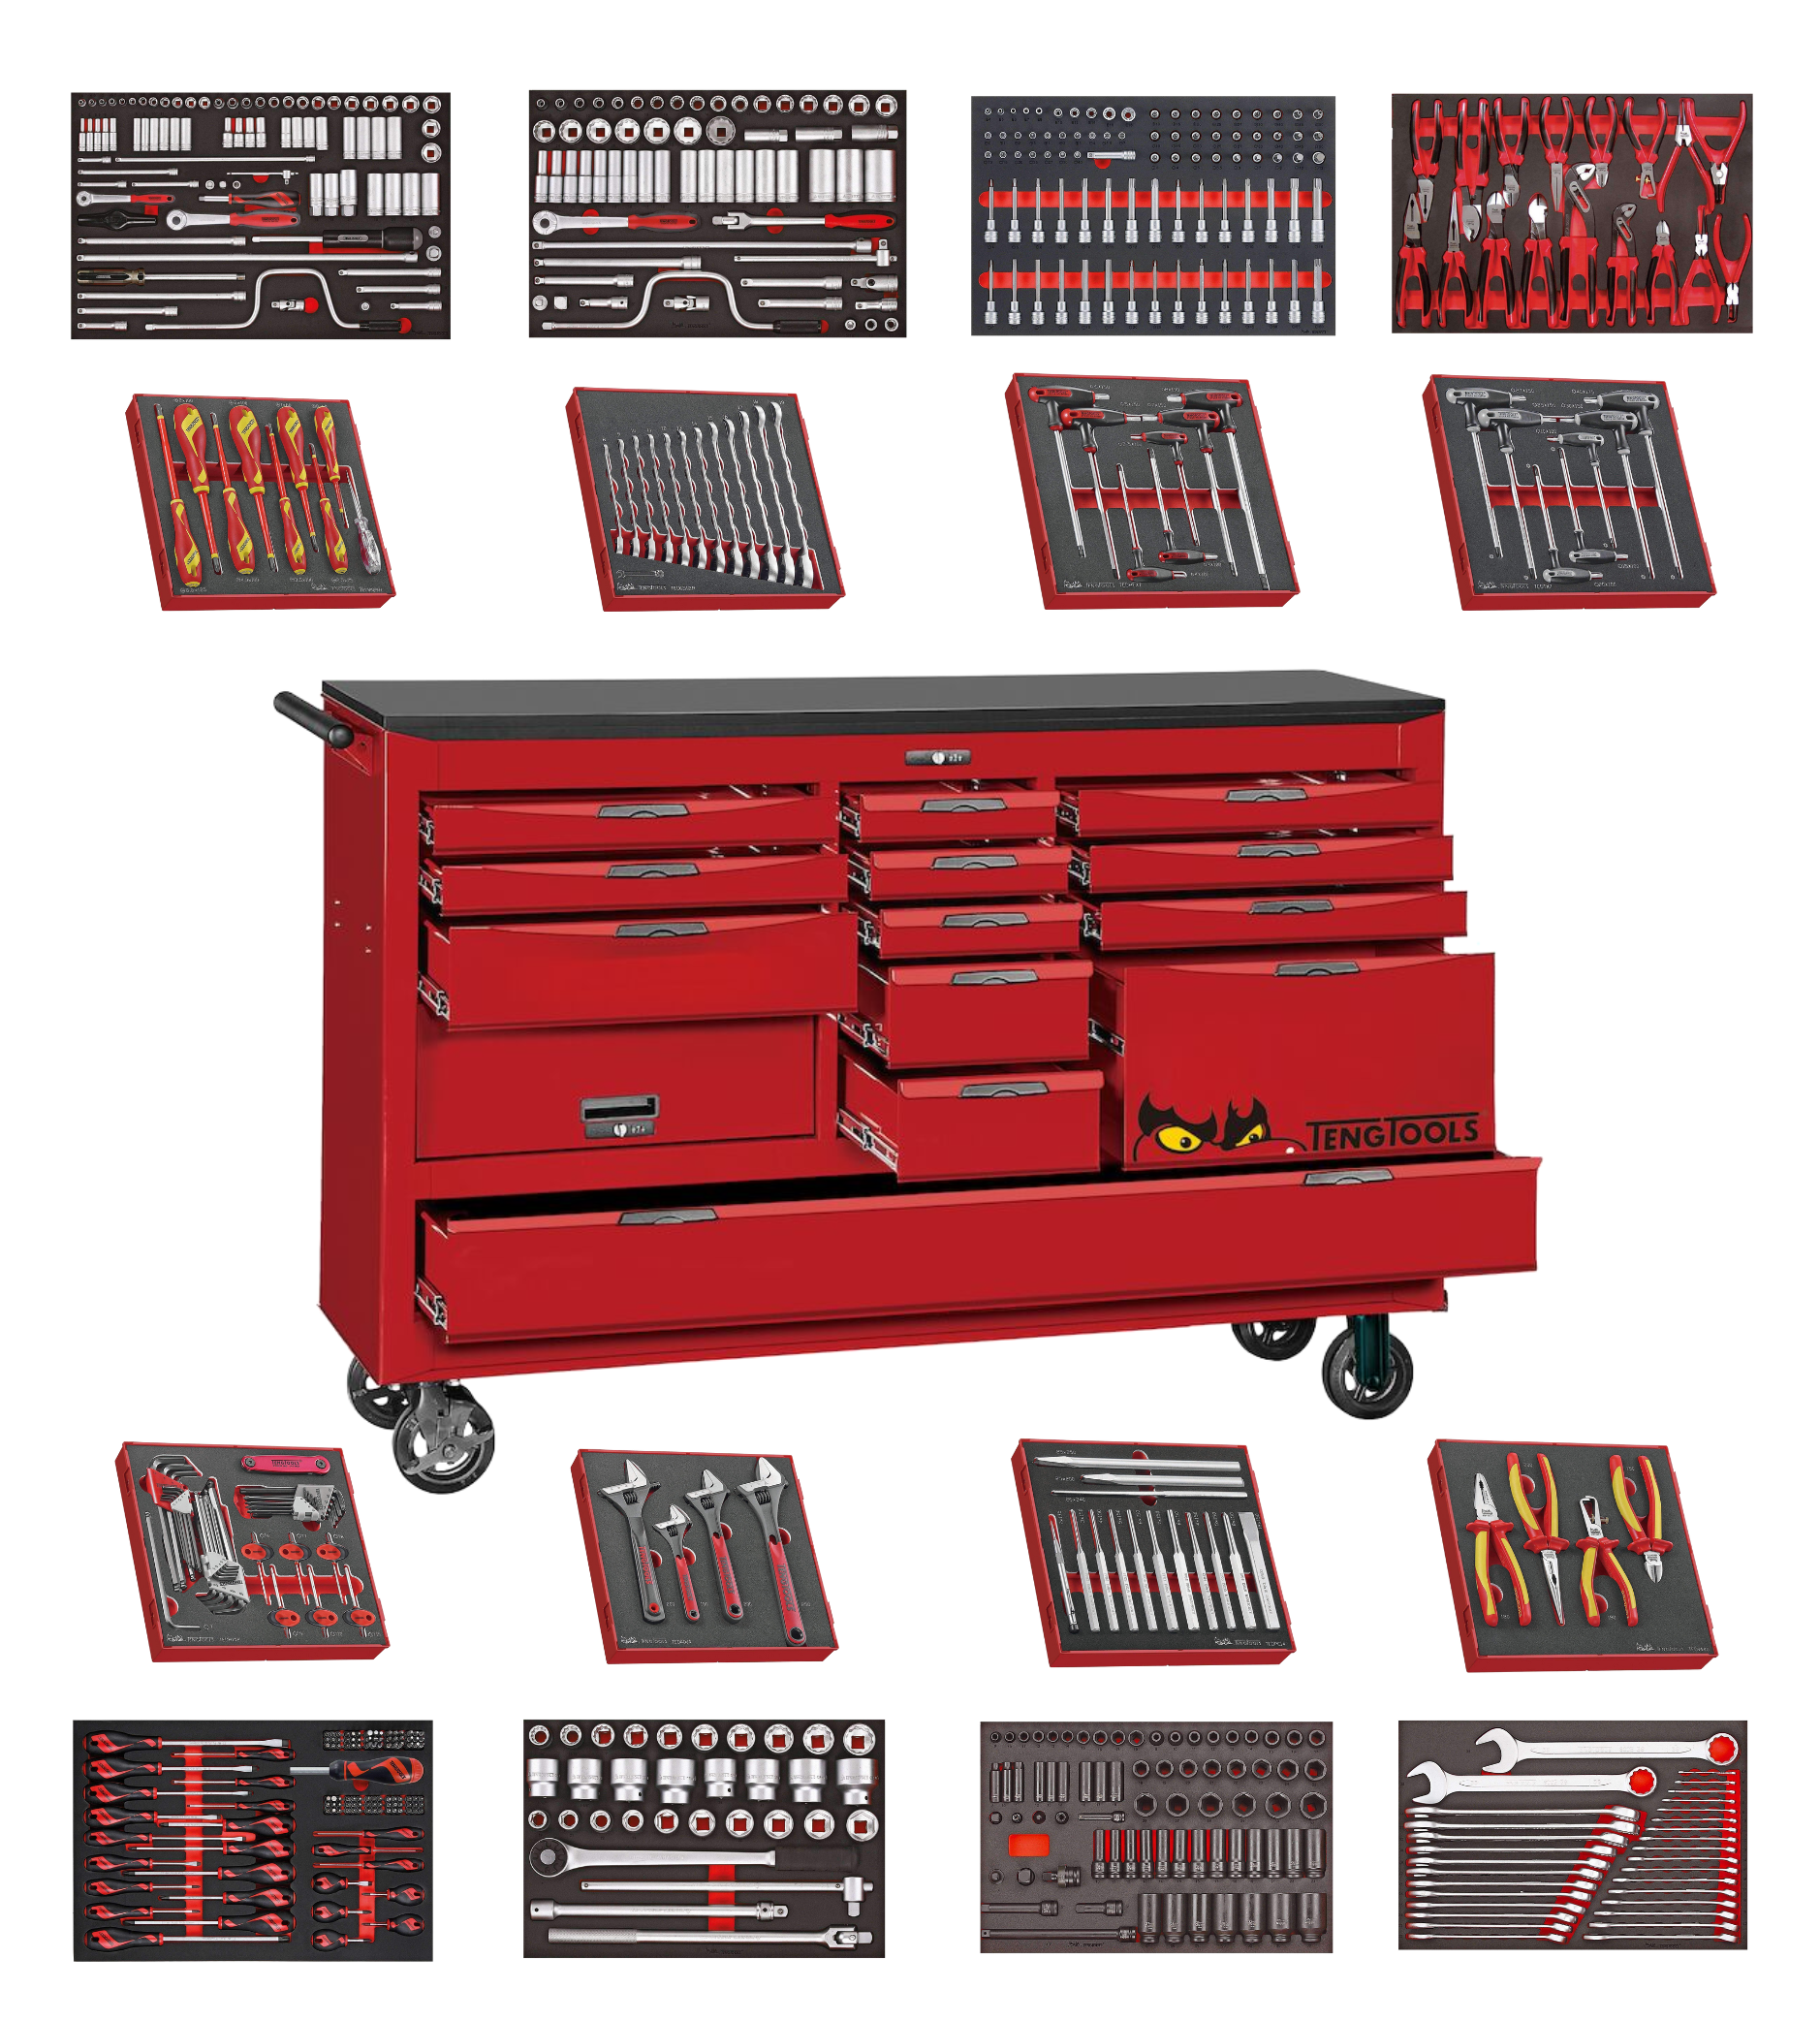 Teng Tools TEDPC14 - 14 Piece Punch and Chisel Set in Eva Tray